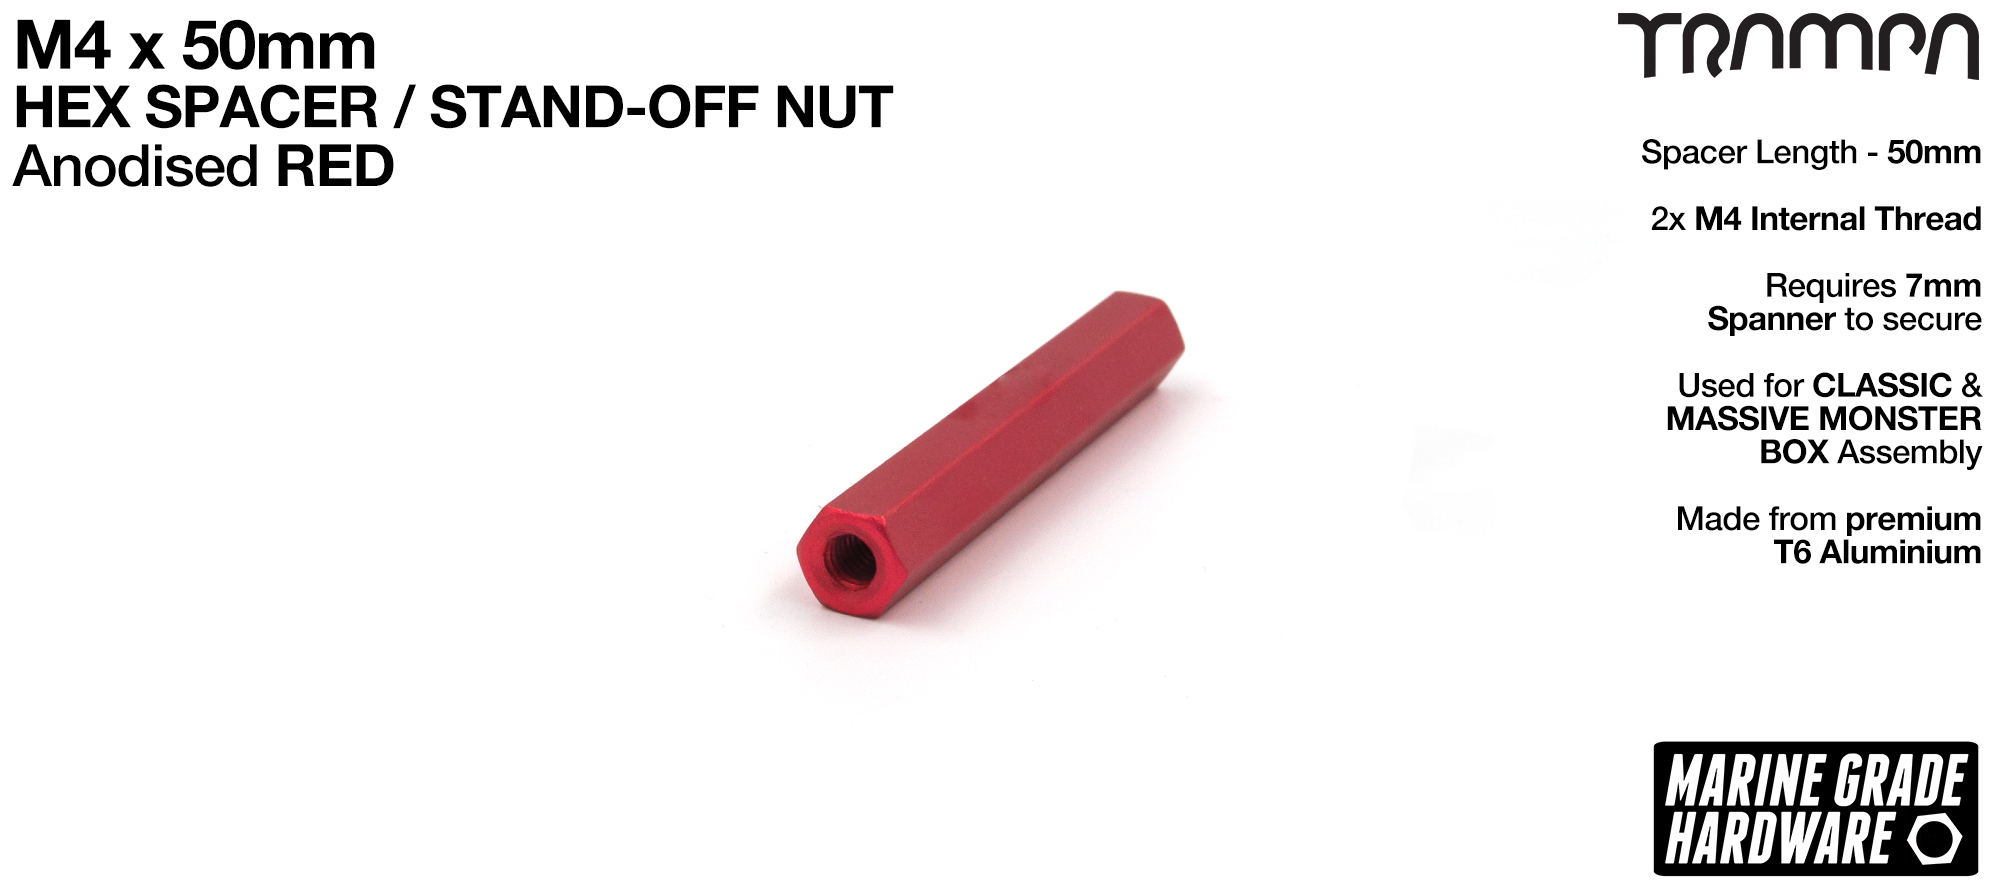 M4 x 50mm Aluminium Threaded HEX Spacer Nut used for assembling the MONSTER Battery Boxes - RED